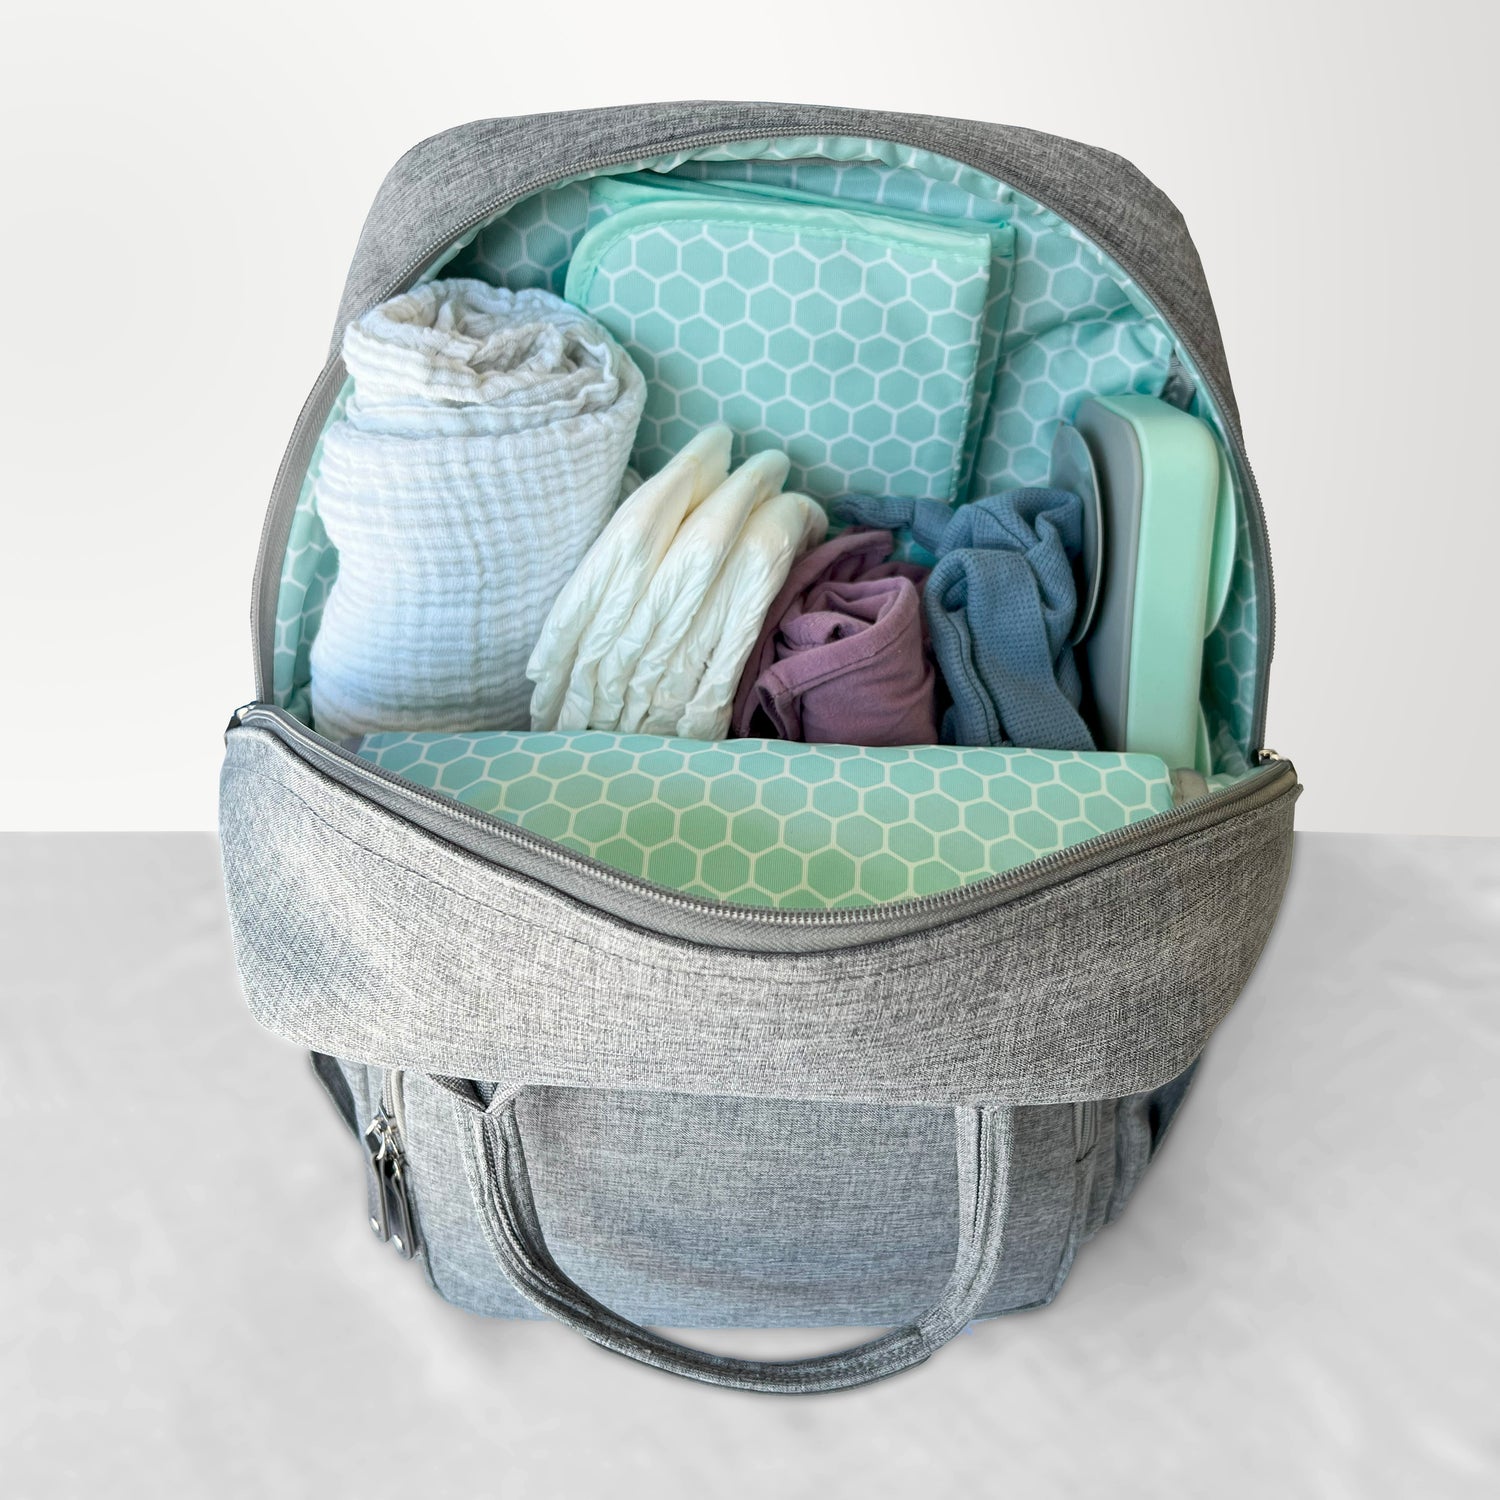 The Unbothered Diaper Bag